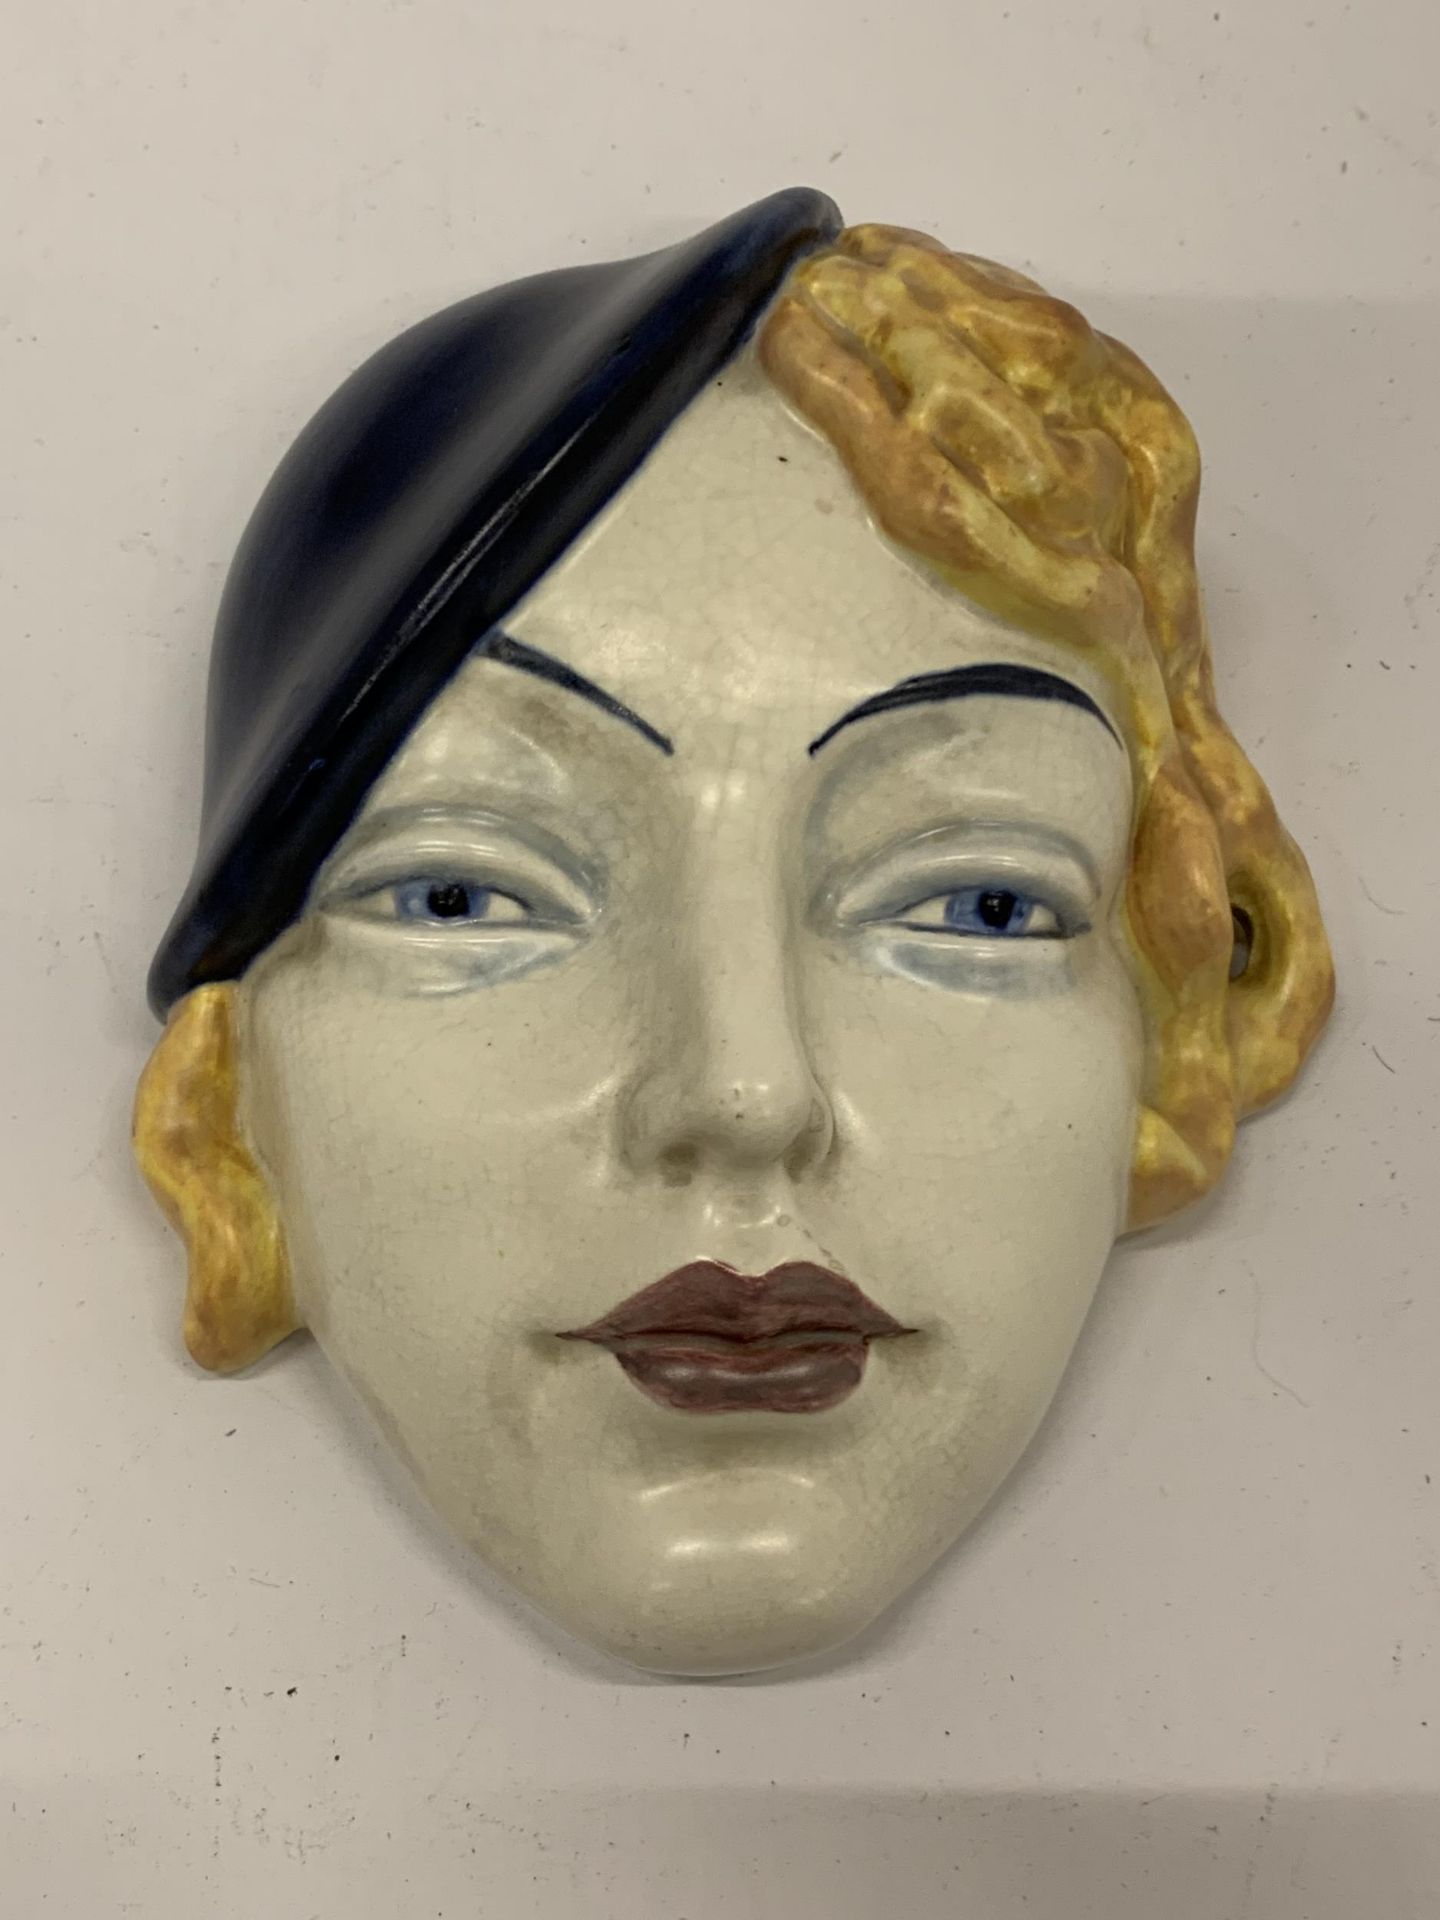 AN ART DECO STYLE FACE MASK, STAMPED 197, MADE IN ENGLAND